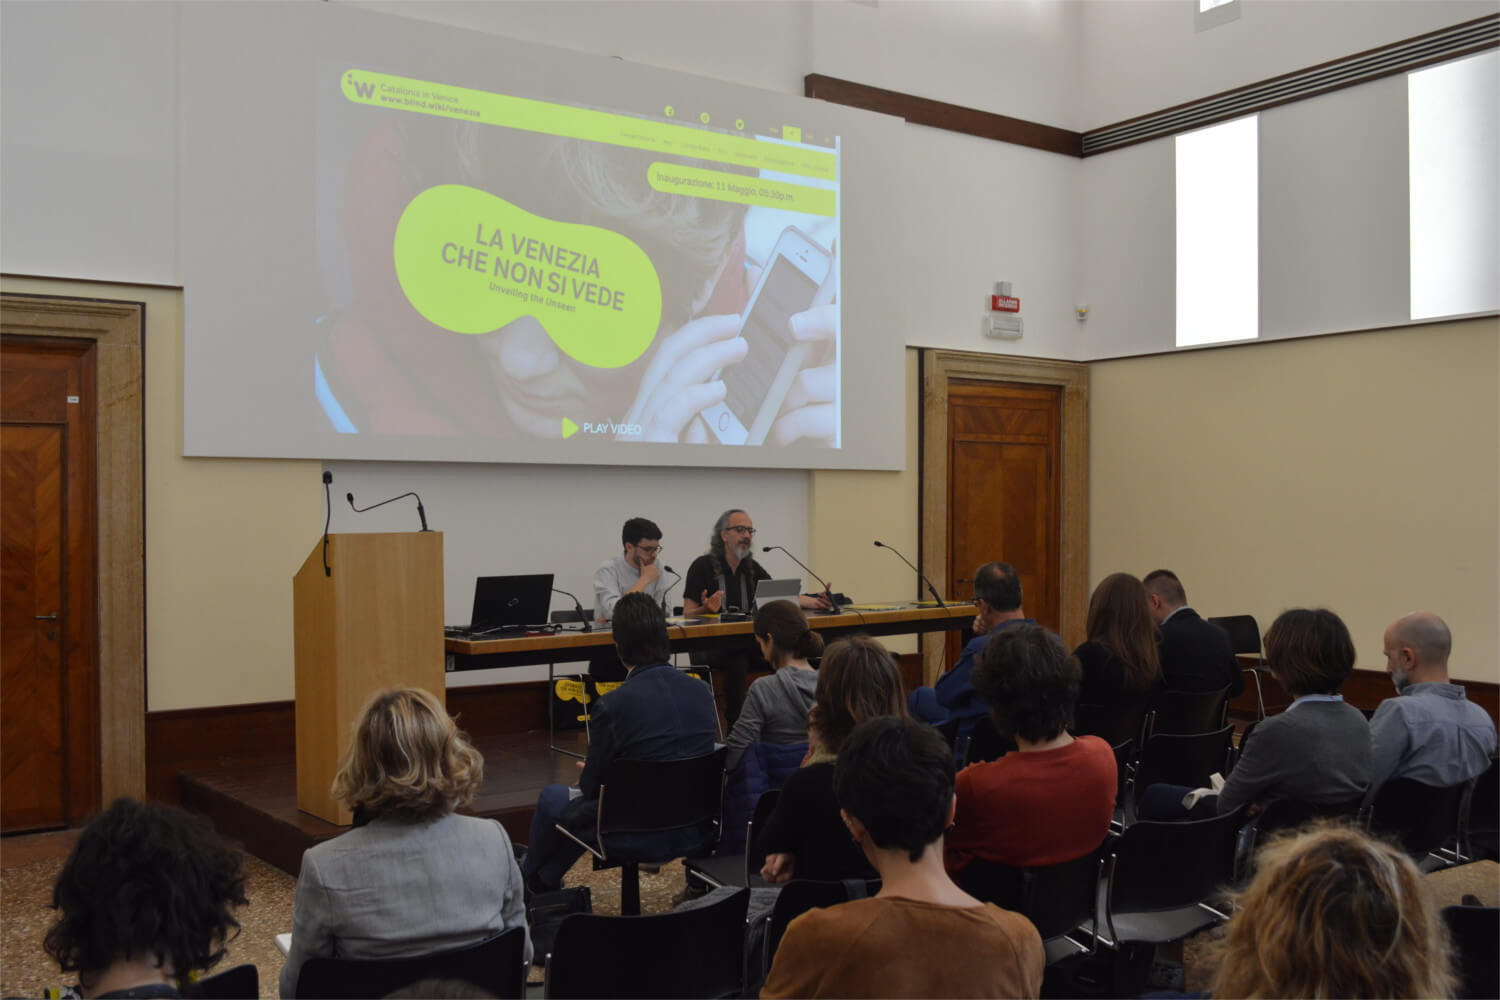 Several pictures of the "Cartographies of the Unseen" International Seminar